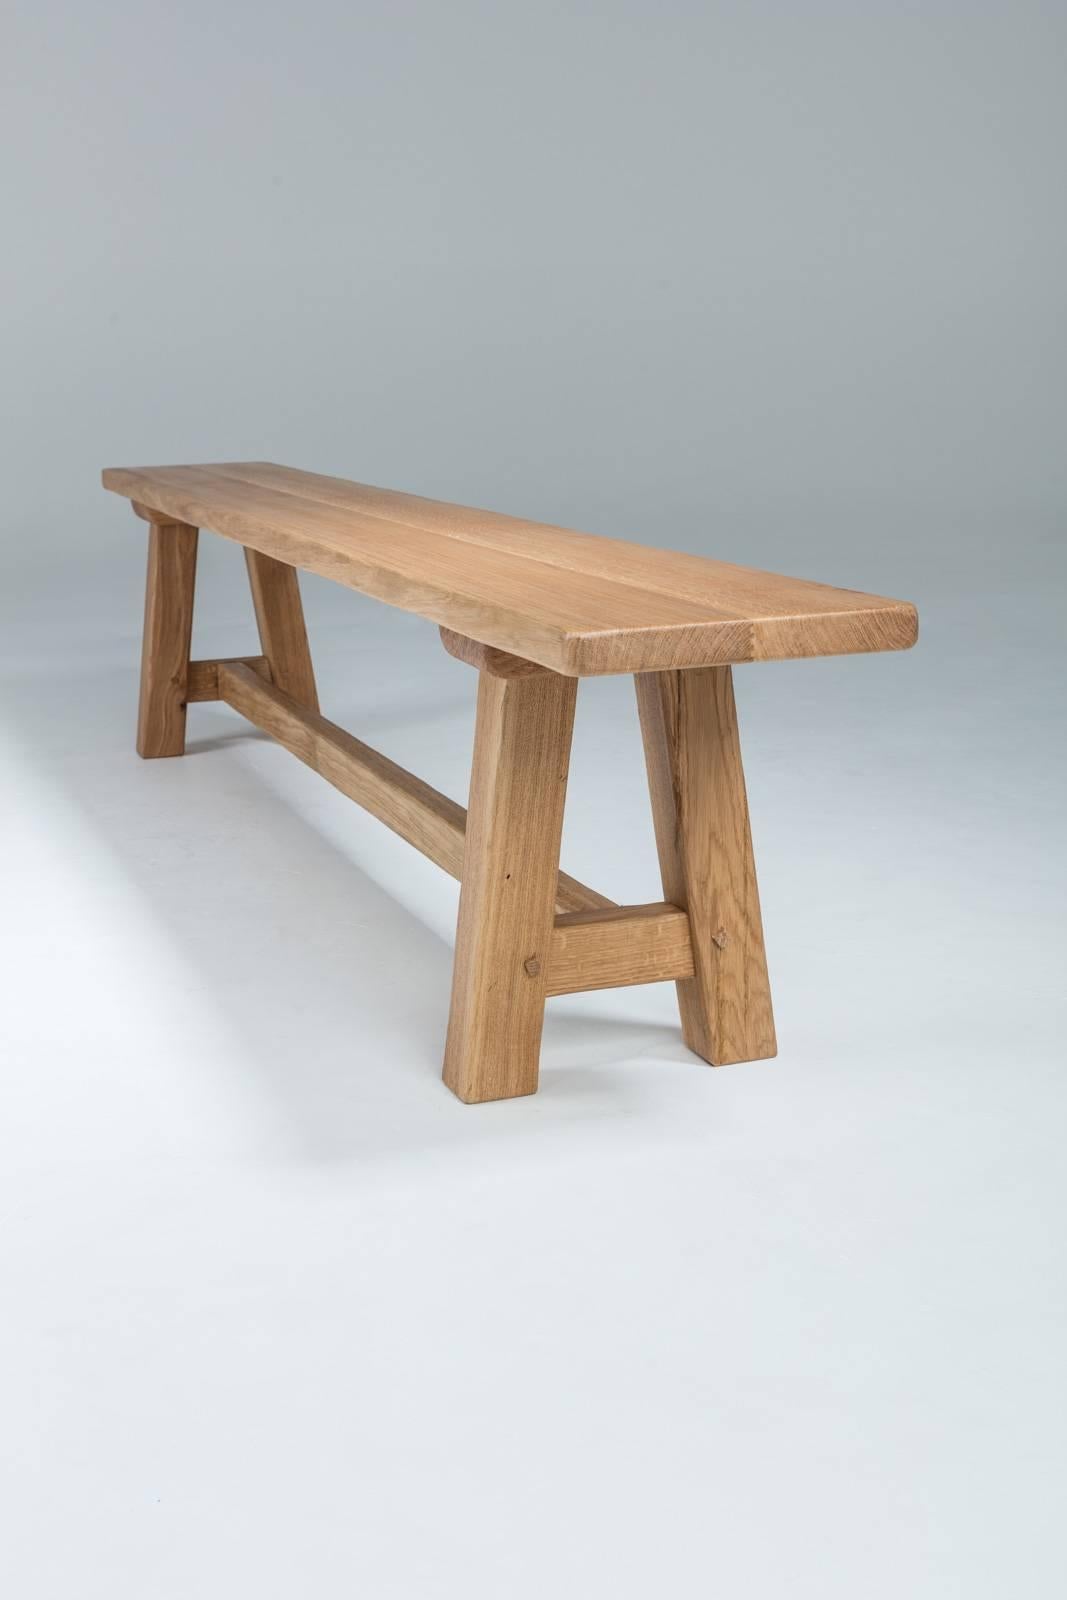 Bespoke French Oak Trestle Table In Excellent Condition For Sale In Petworth, West Sussex